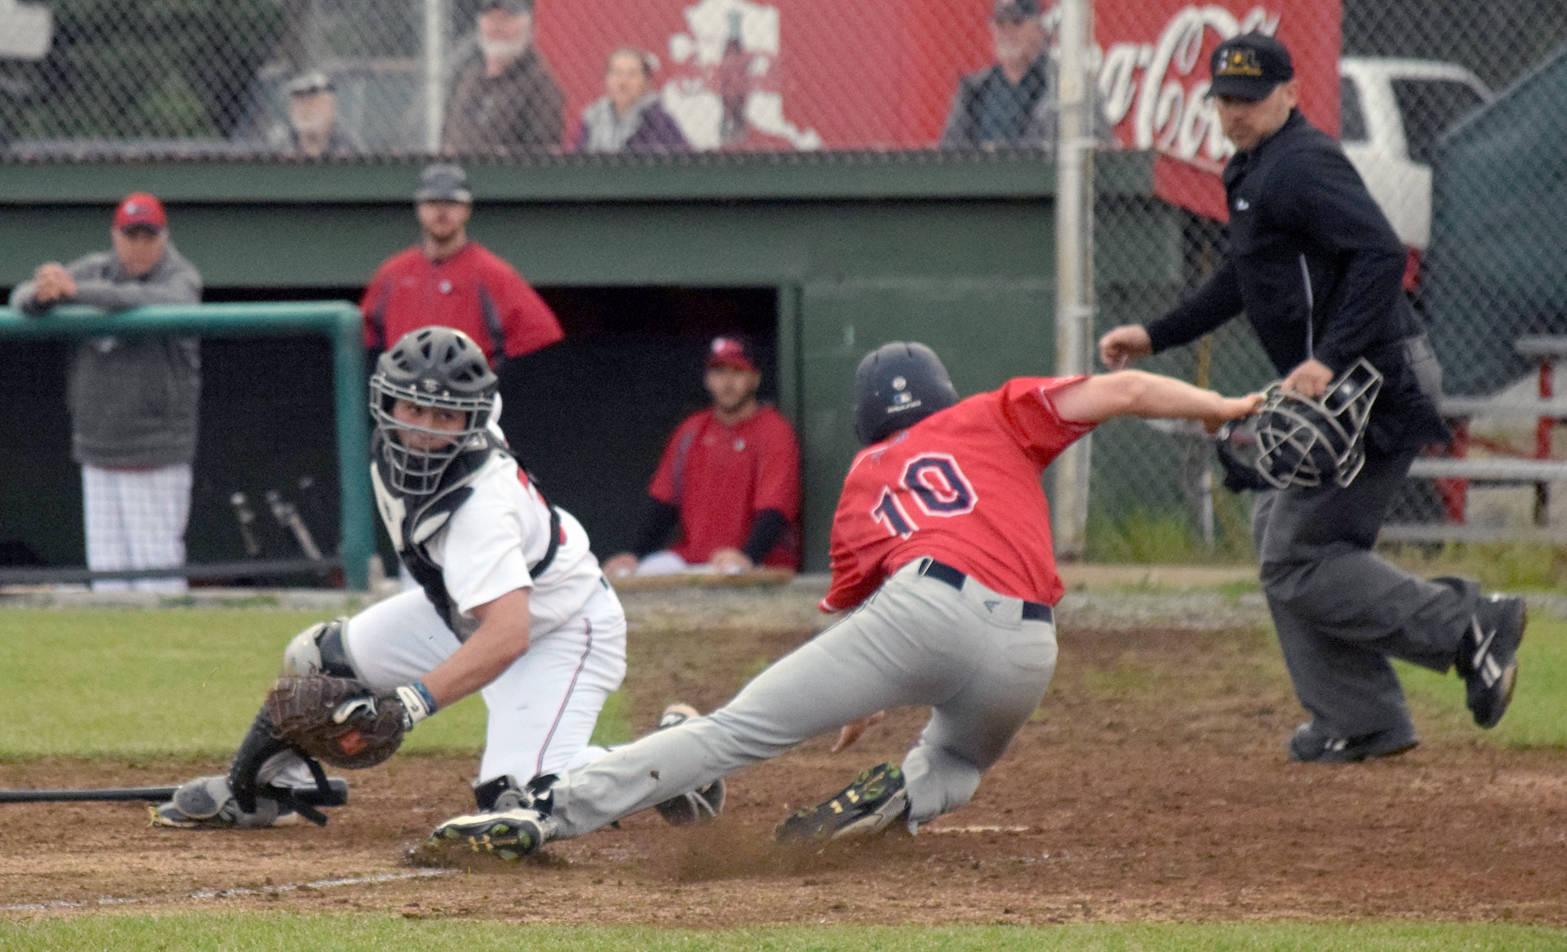 Peninsula Oilers catcher Mikey Hoehner prepares to tag out Levi Gilcrease of the Chugiak-Eagle River Chinooks for the first out in the ninth inning Friday, June 30, 2017, at Coral Seymour Memorial Park in Kenai. Gilcrease would have been the tying run in the Oilers’ 4-3 victory. (Photo by Jeff Helminiak/Peninsula Clarion)